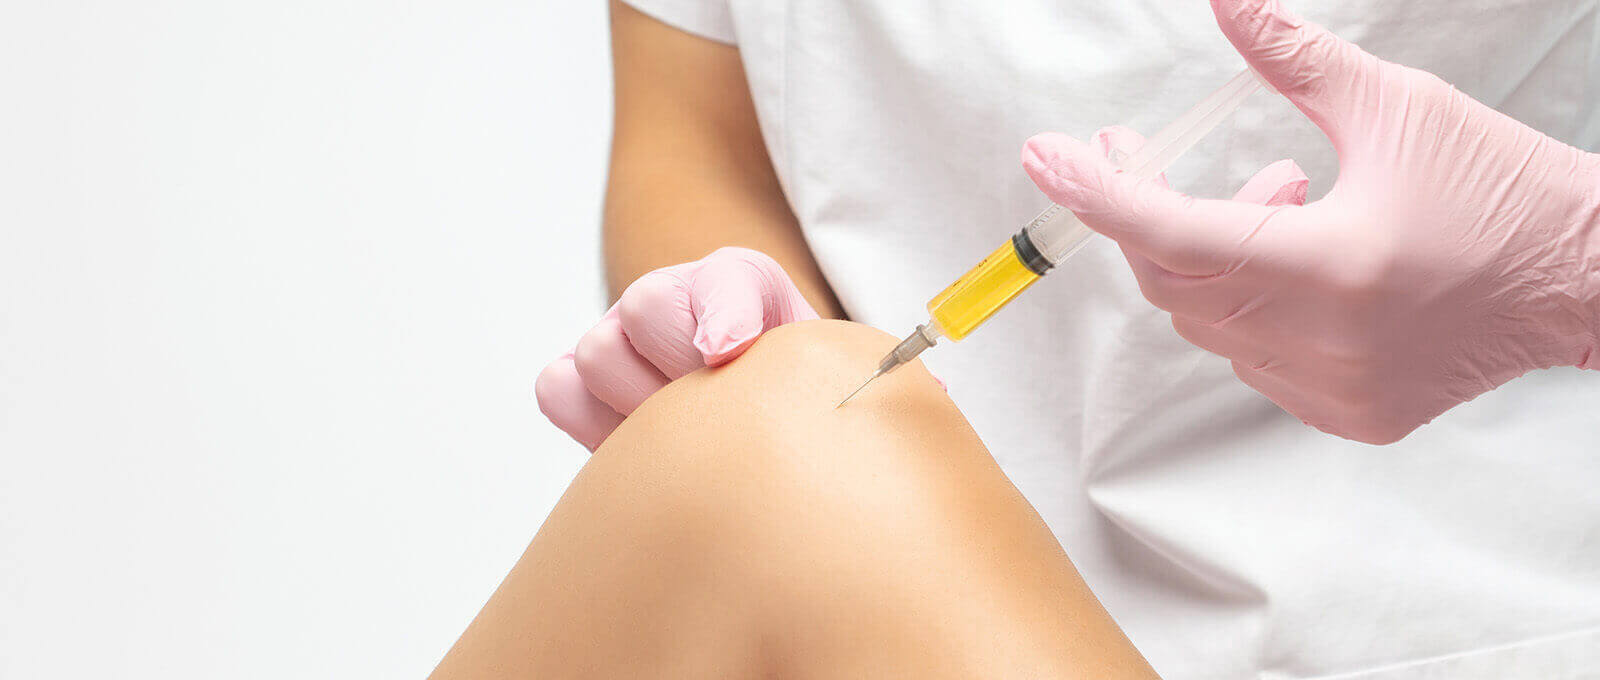 Minimally invasive Platelet-Rich Plasma injection treatment (PRP injection treatment and therapy) for knee pain relief